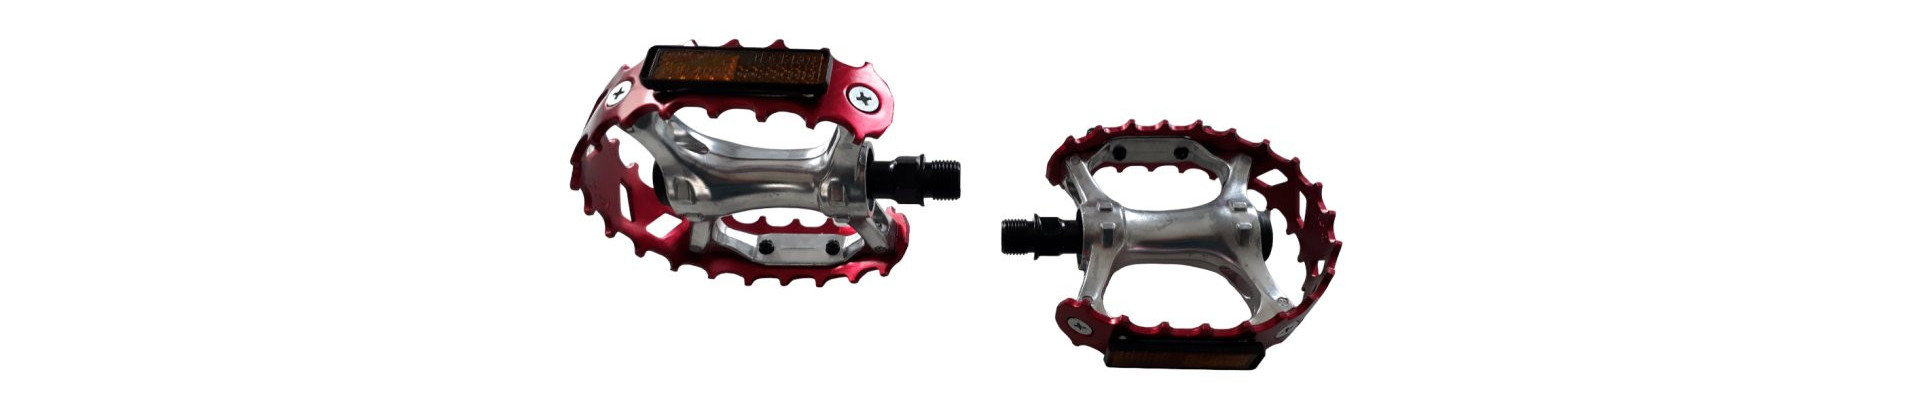 BMX freestyle trail pedals